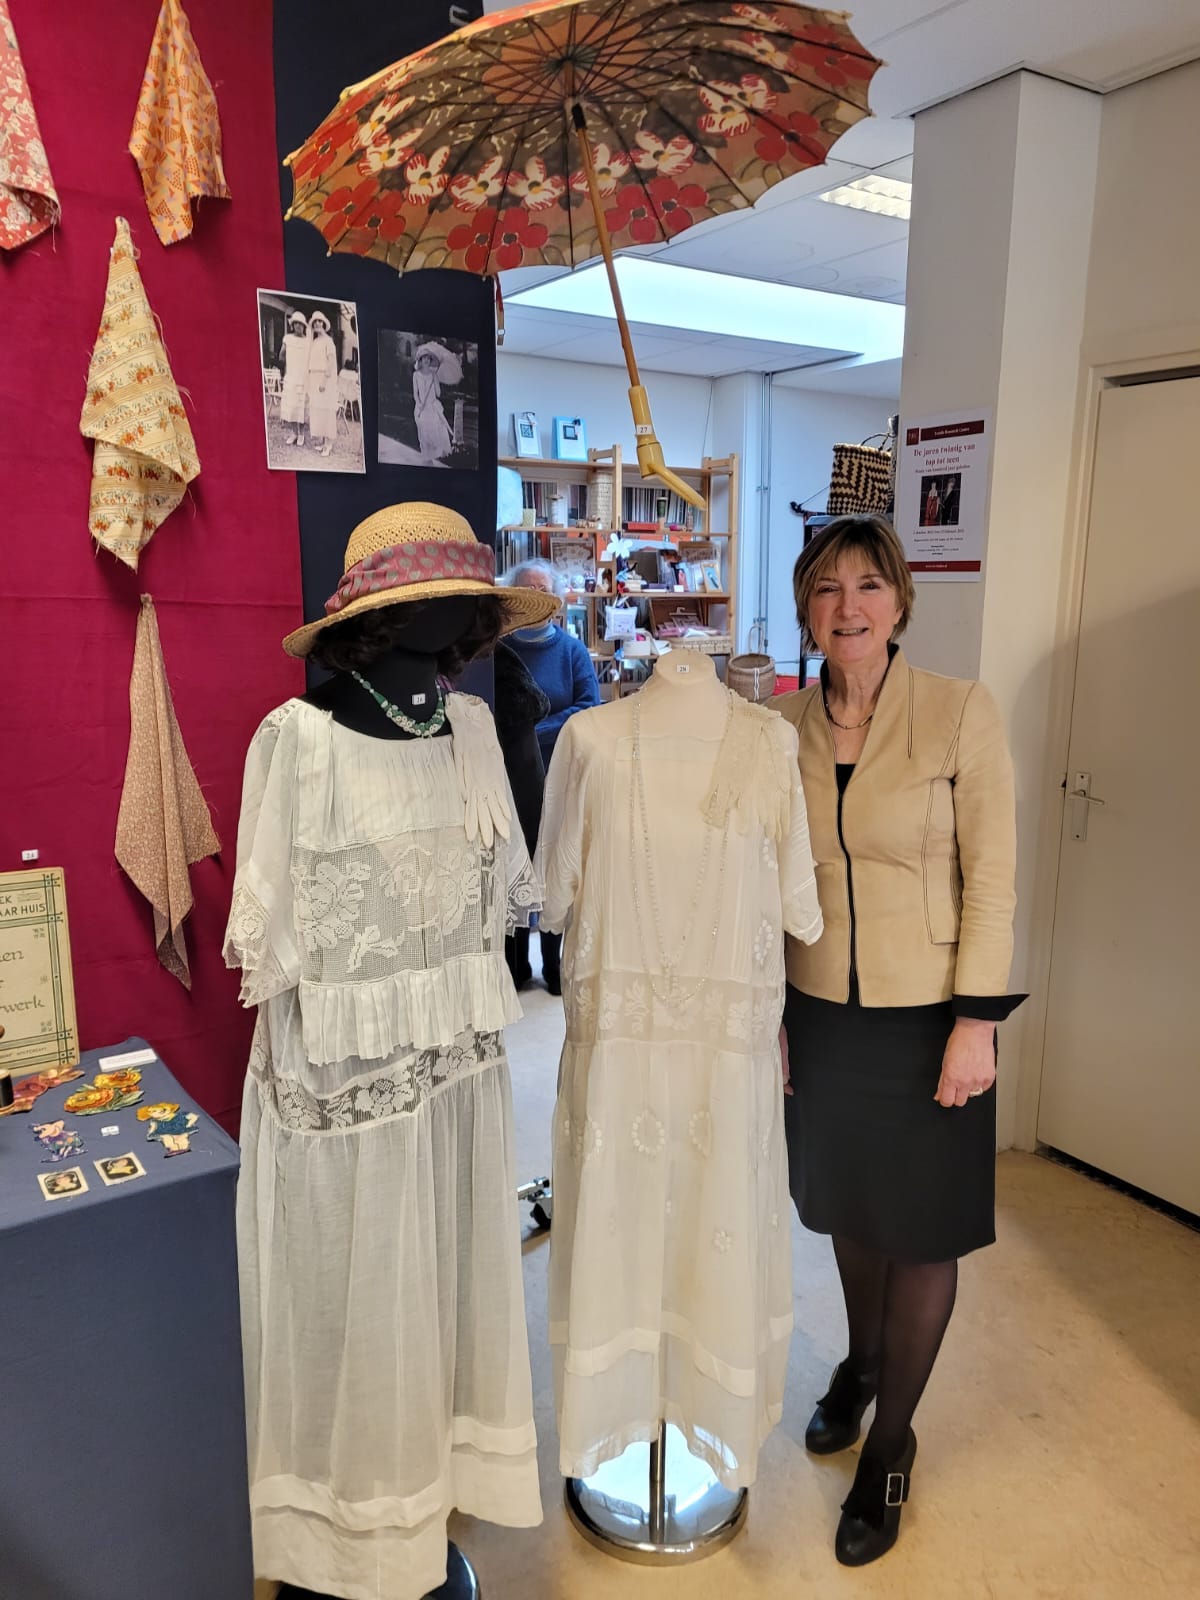 Prof. Annetje Ottow, Chair of the Leiden University Board, on a recent visit to the TRC with garments of her great-aunt from the 1920s Dutch East Indies.